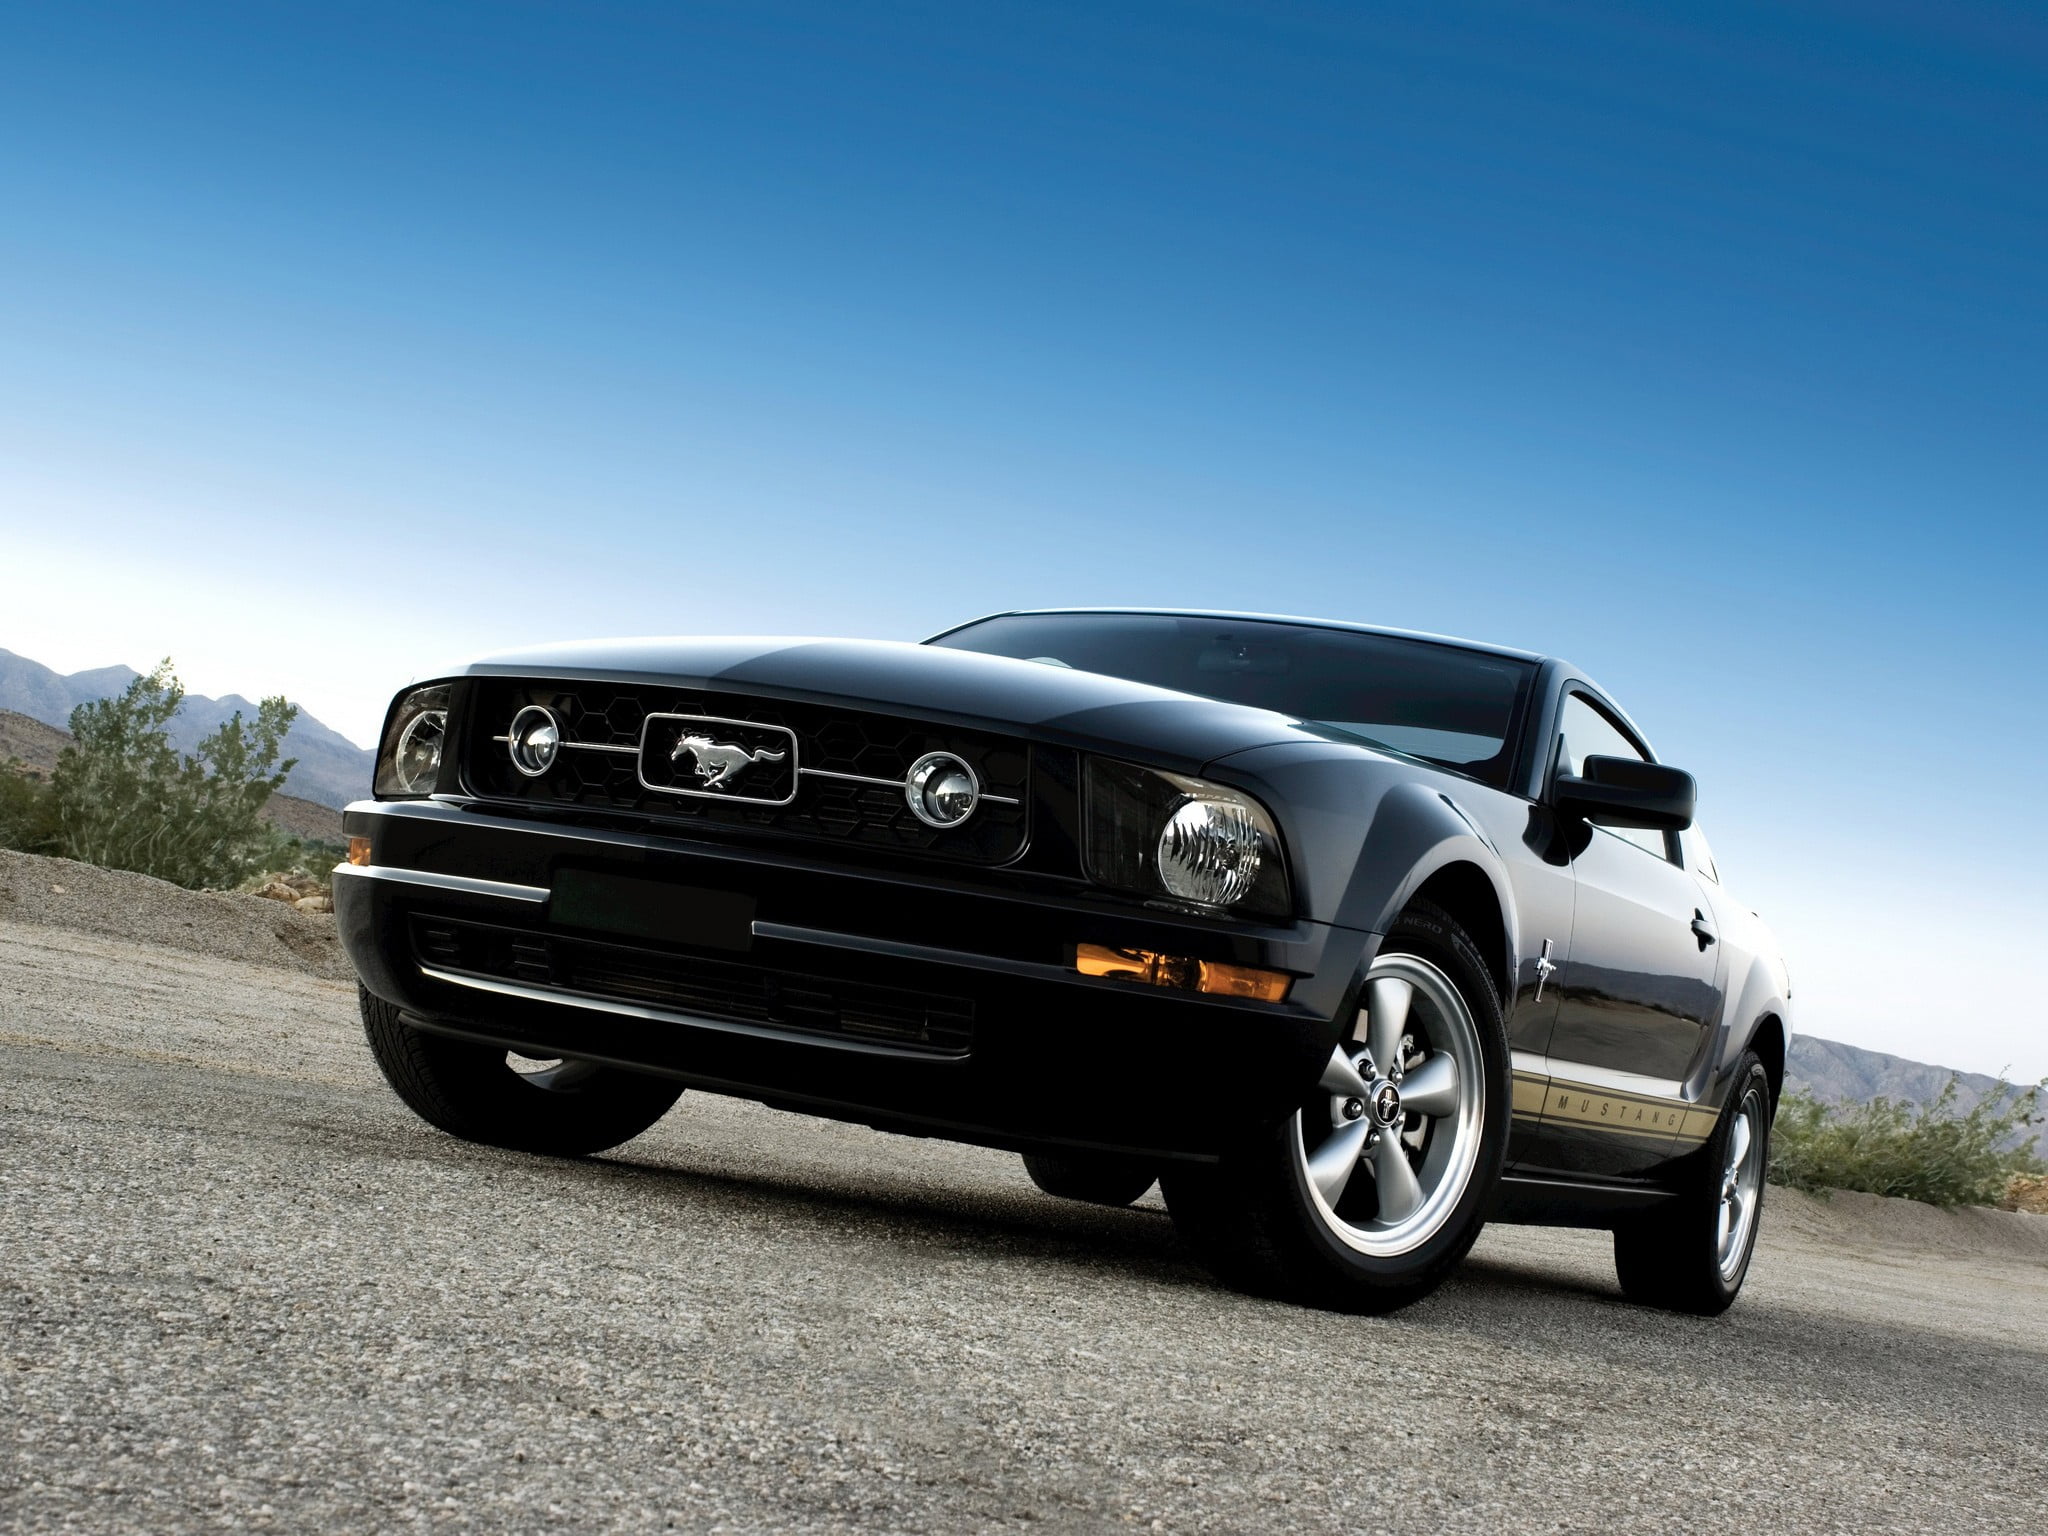 5th Gen Black Ford Mustang Coupe Car Hd Wallpaper Wallpaper Flare